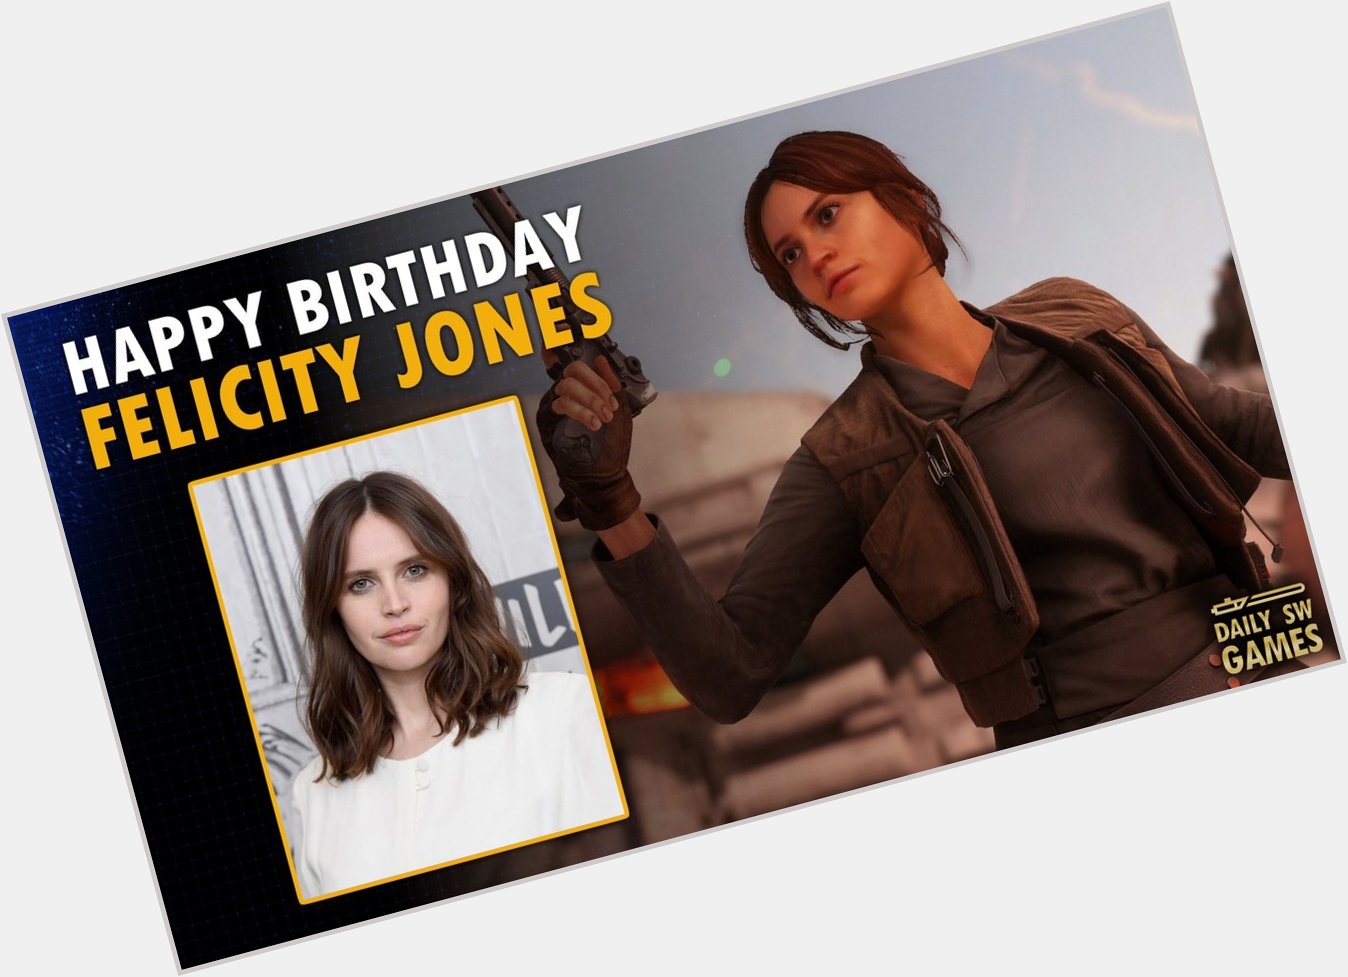 Happy 38th birthday to the wonderful Felicity Jones, who portrayed Jyn Erso in Rogue One: A Star Wars Story! 